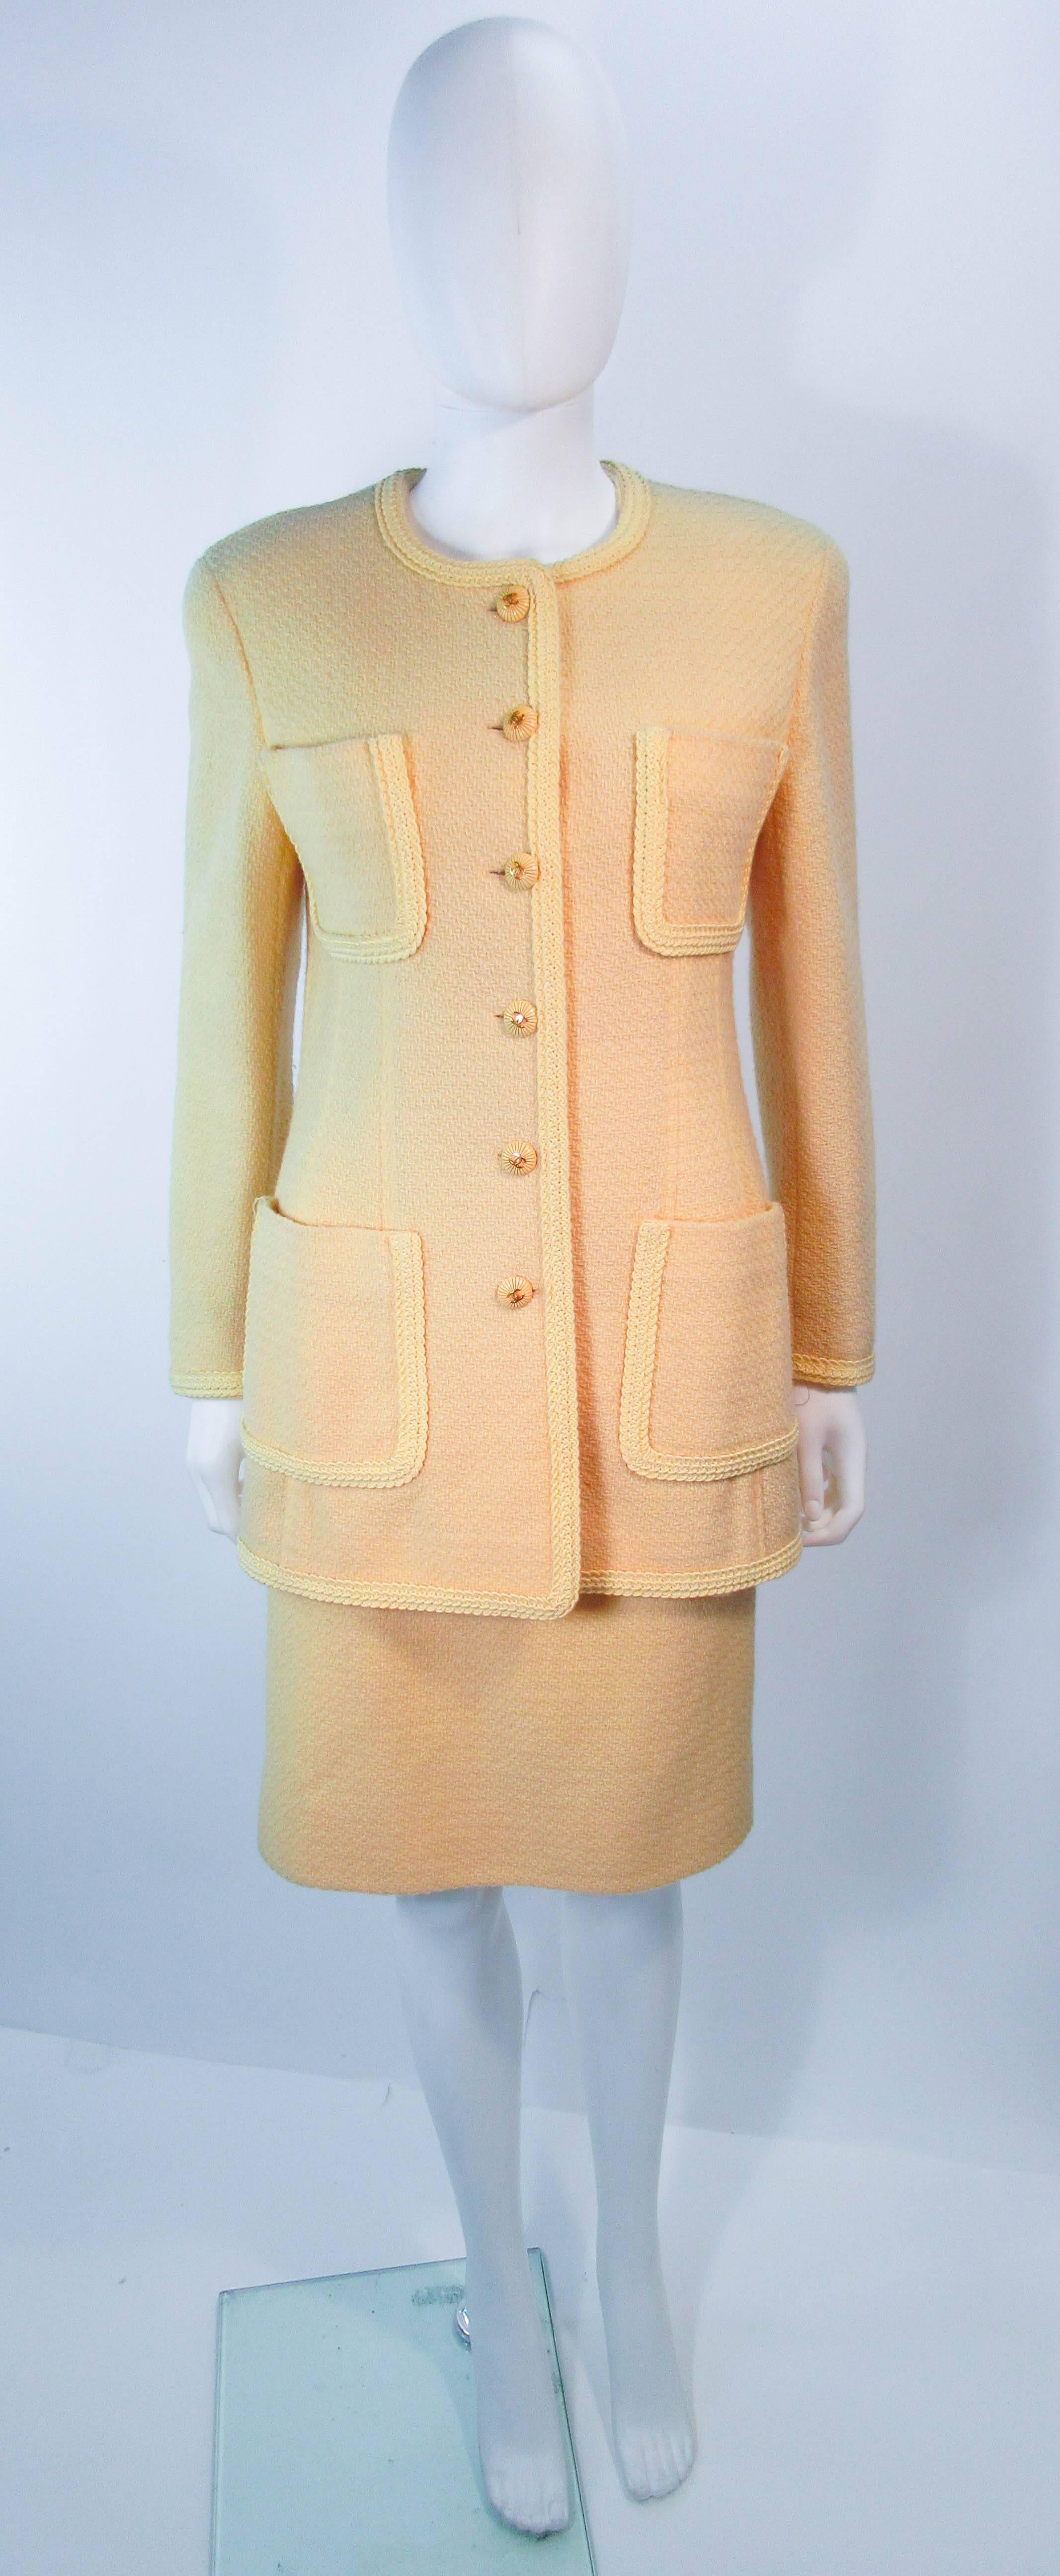 This Chanel skirt suit is composed of a yellow wool with textured yellow buttons with gold 'CC' logo buttons as well as a silk lining. The jacket features center front button closures and four front pockets. The classic pencil style skirt features a